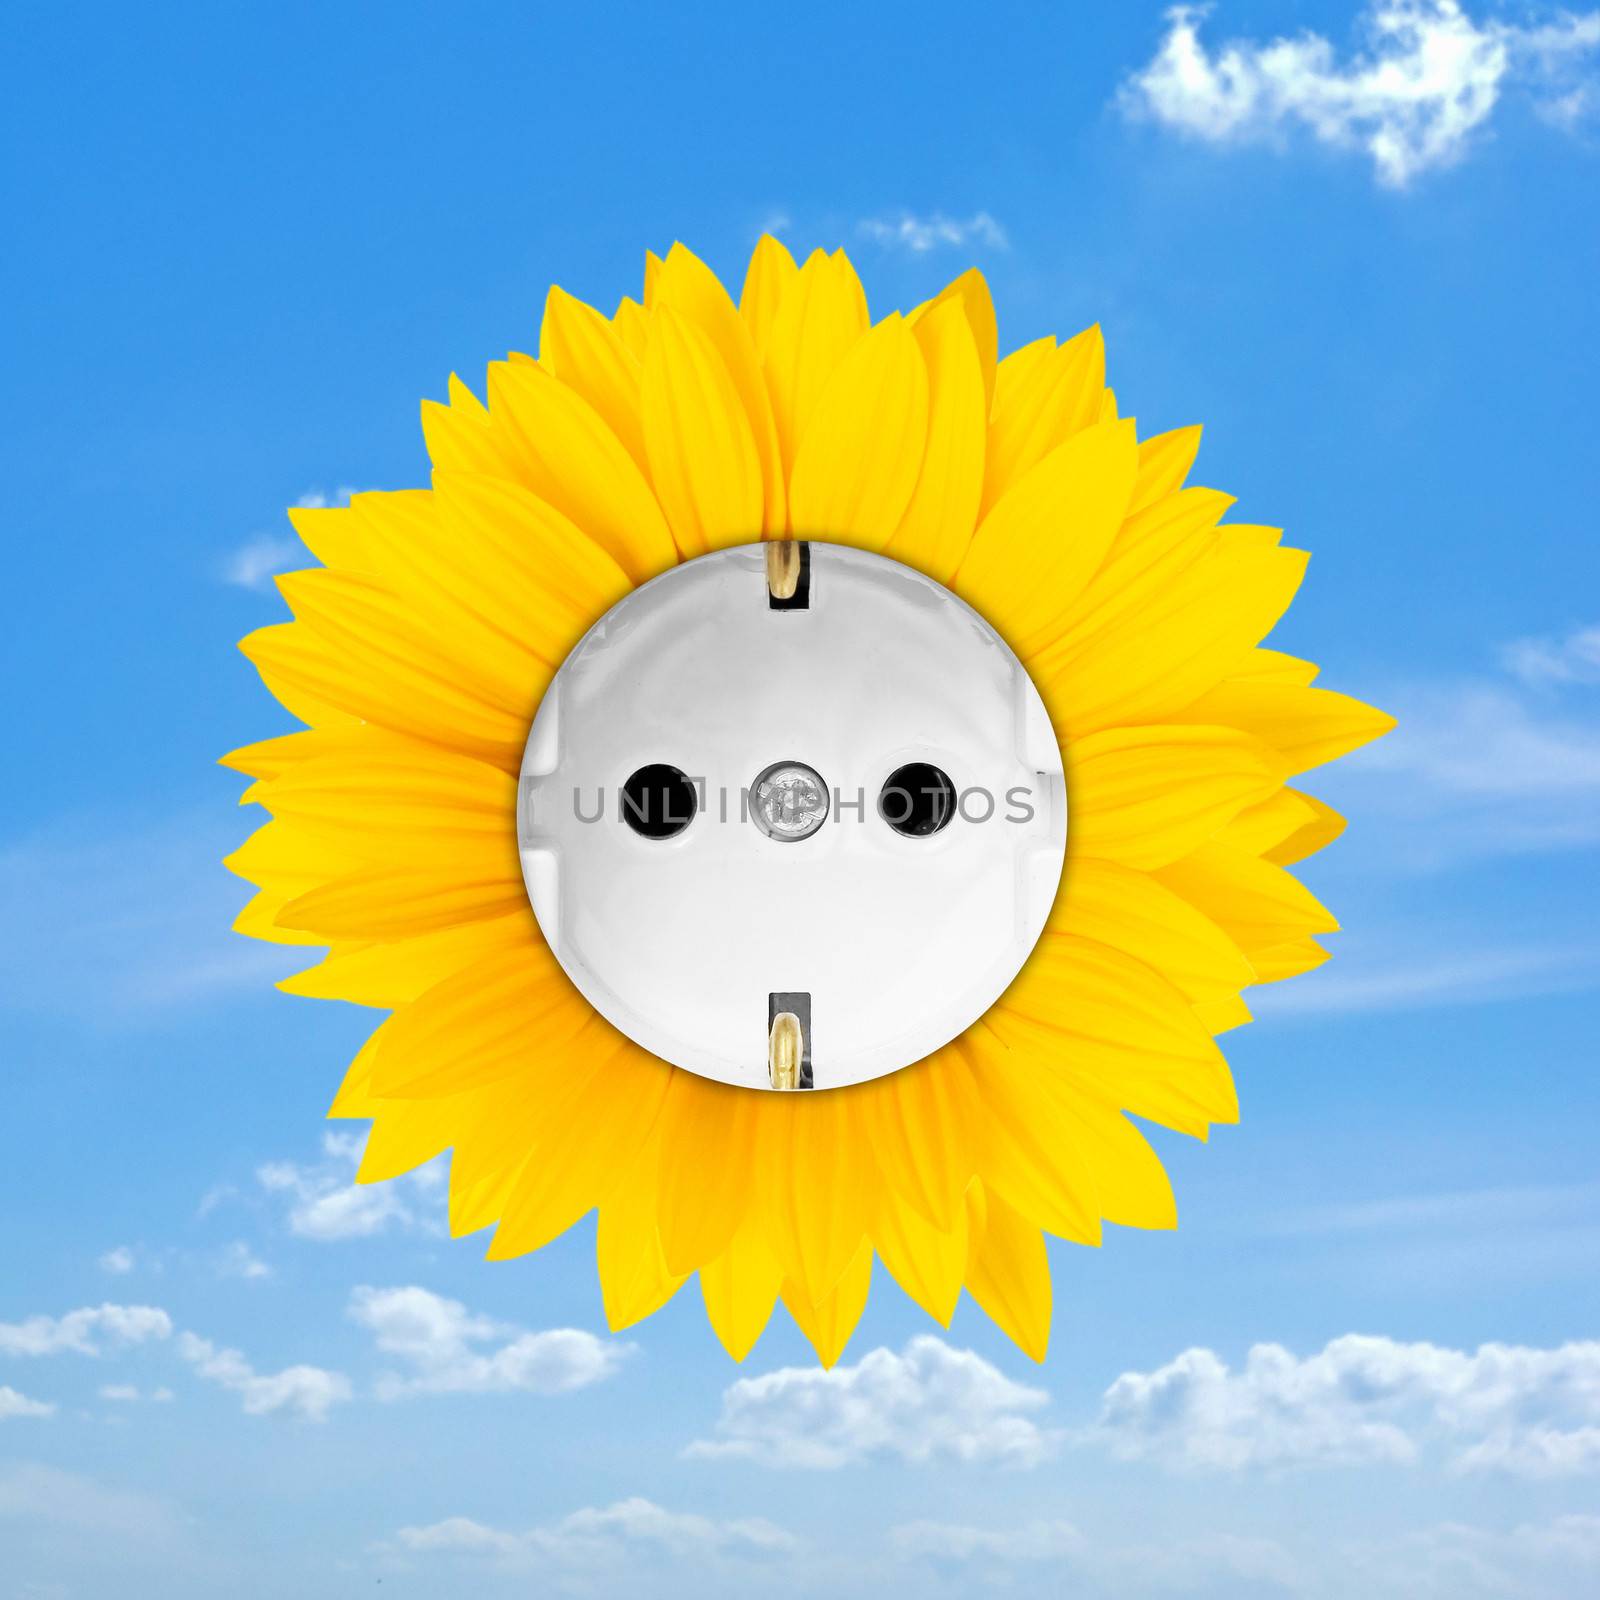 Sunflower combined with a convenience outlet on blue cloudy sky symbolizing sun energy